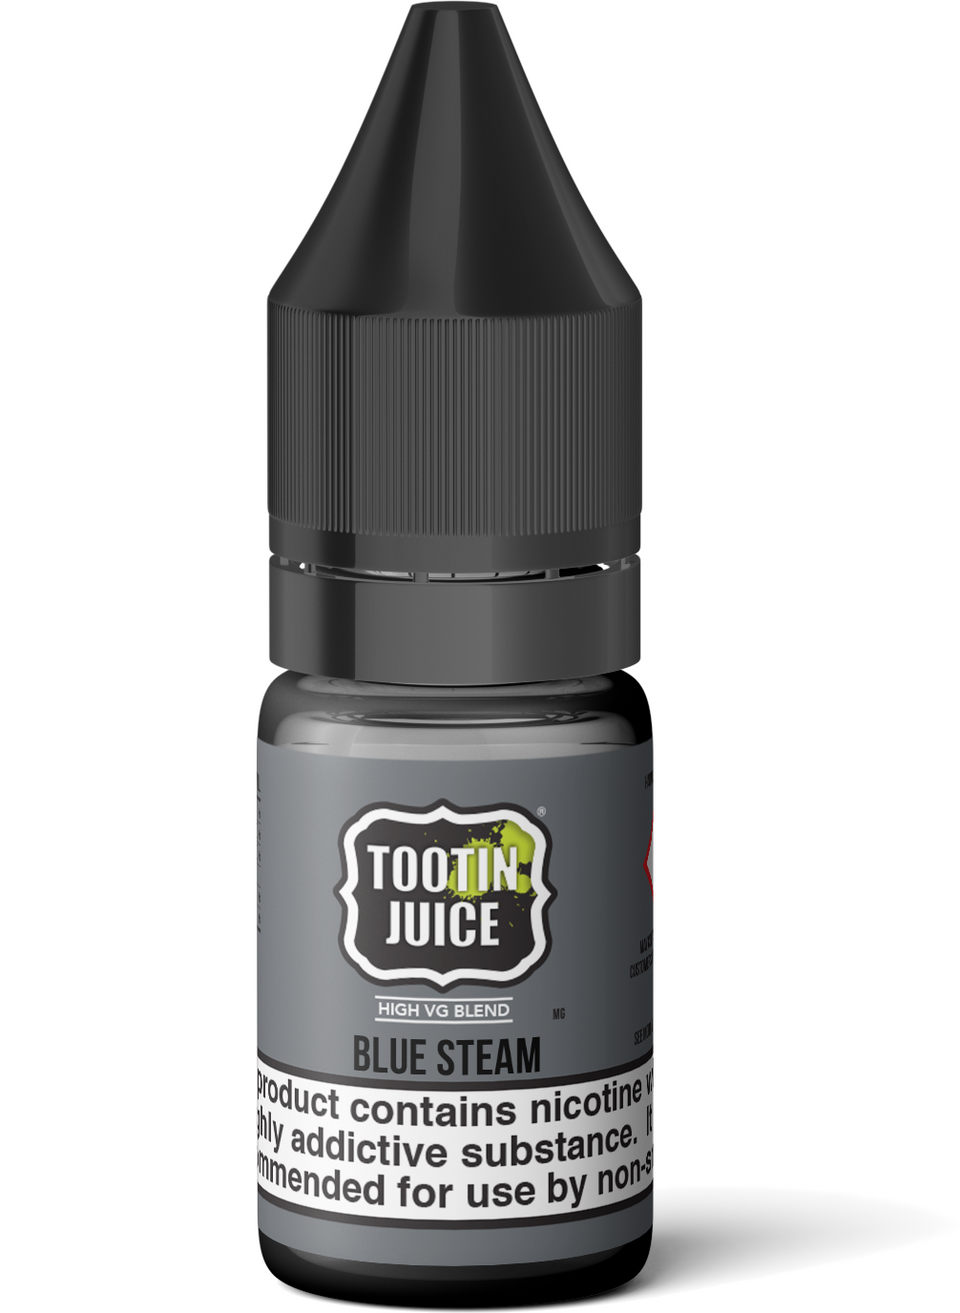 High VG Blue Steam (formerly known as Blueberry Haze) - ASPIRE UK